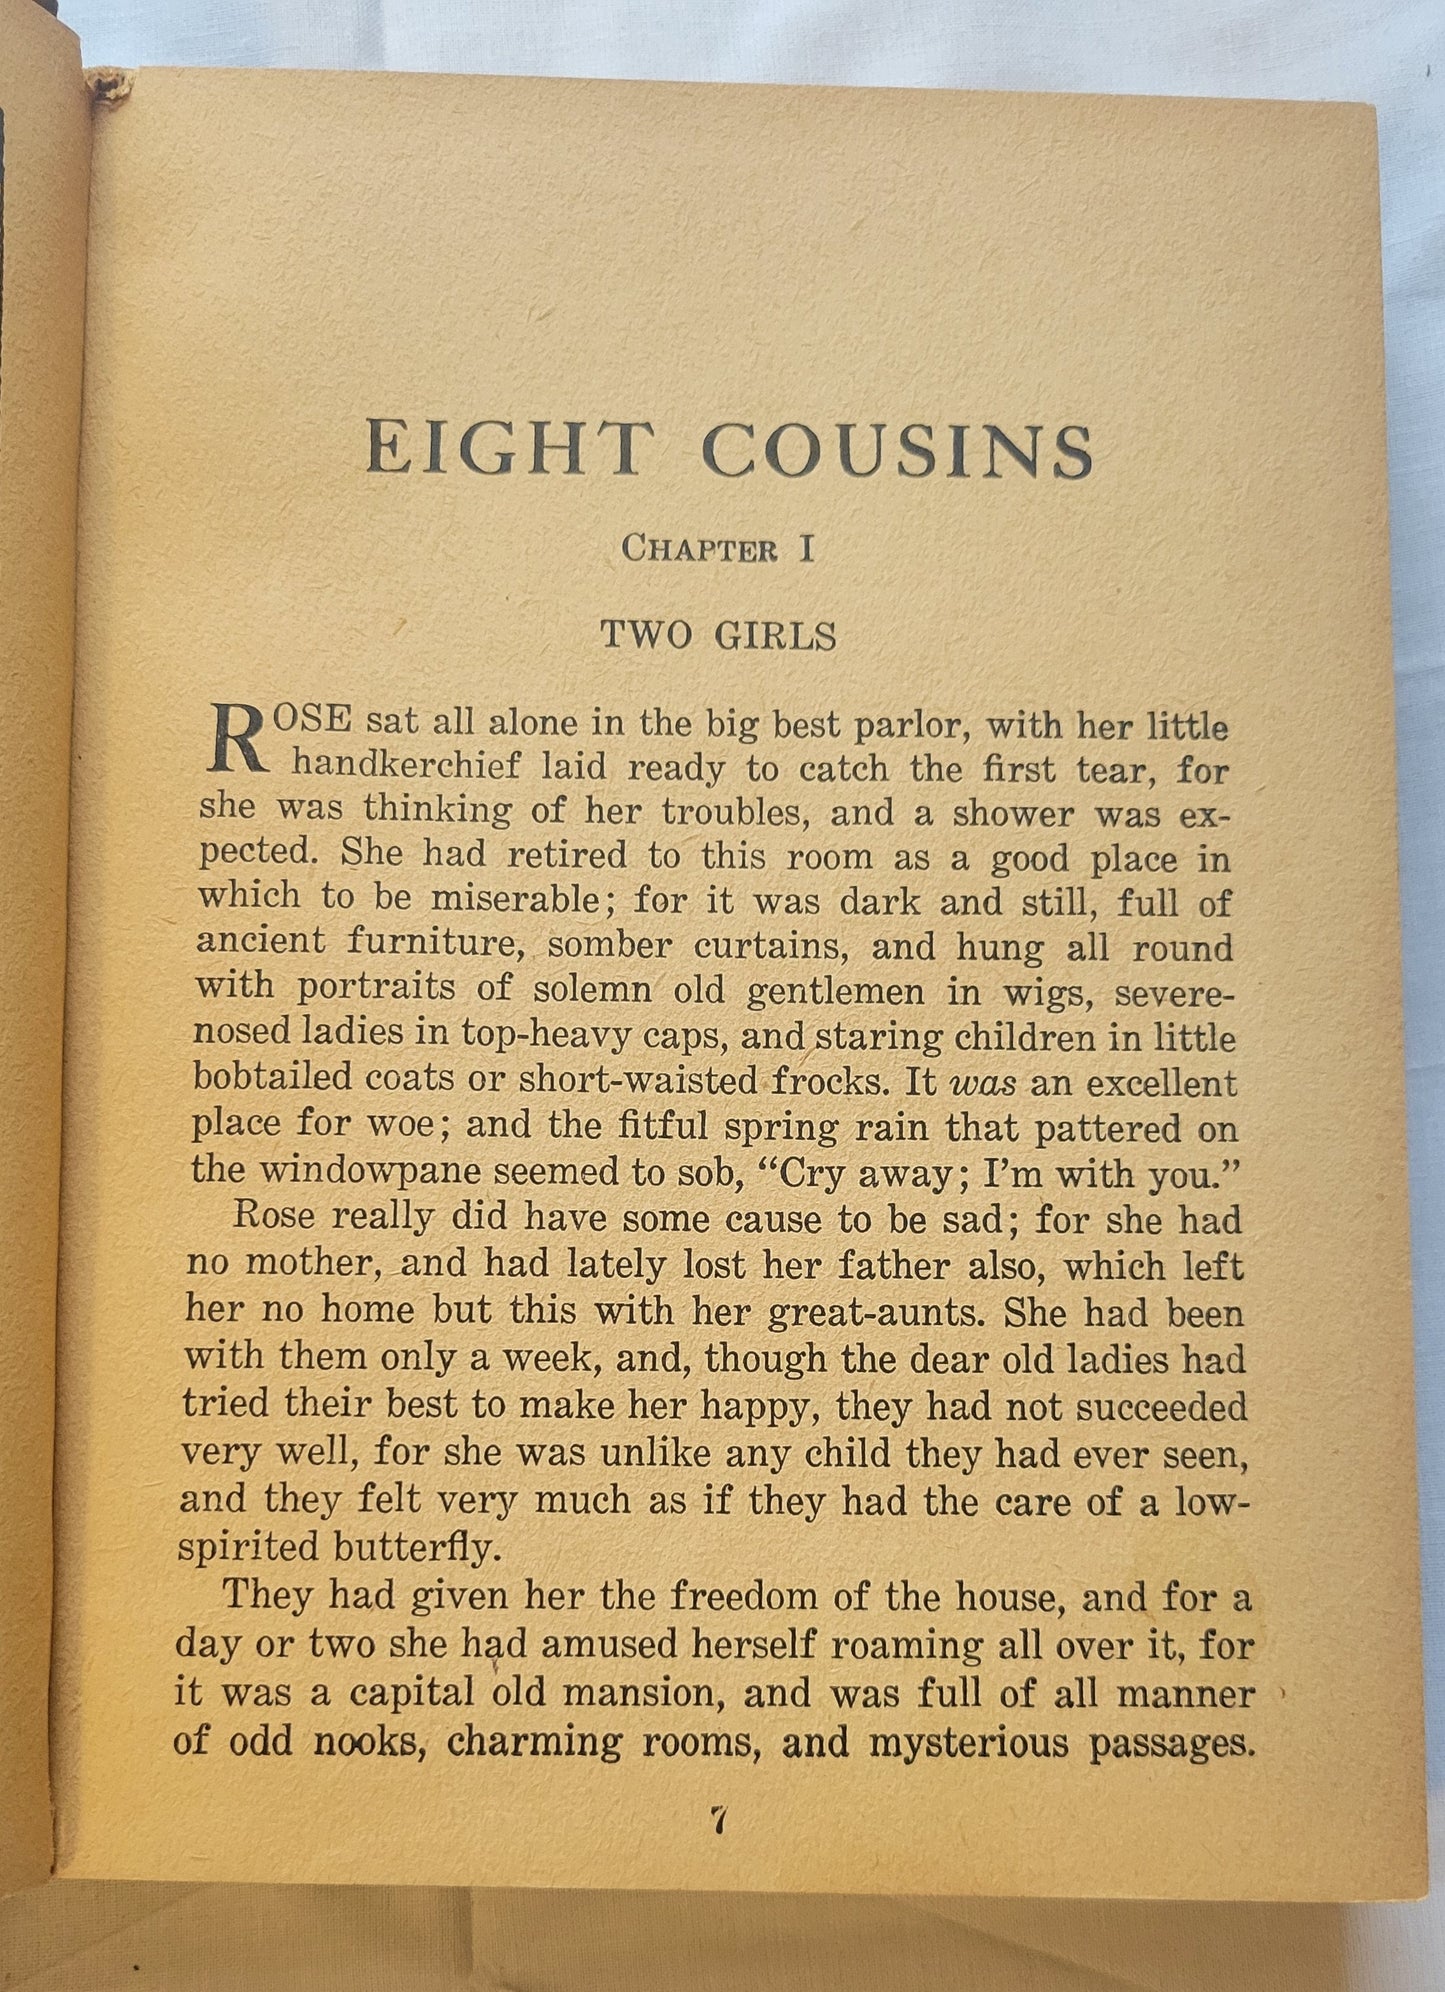 Vintage book "Eight Cousins" by Louisa May Alcott (author of Little Women), illustrated by Erwin L. Hess, and published by Whitman Publishing Company in 1940. View of page 7.